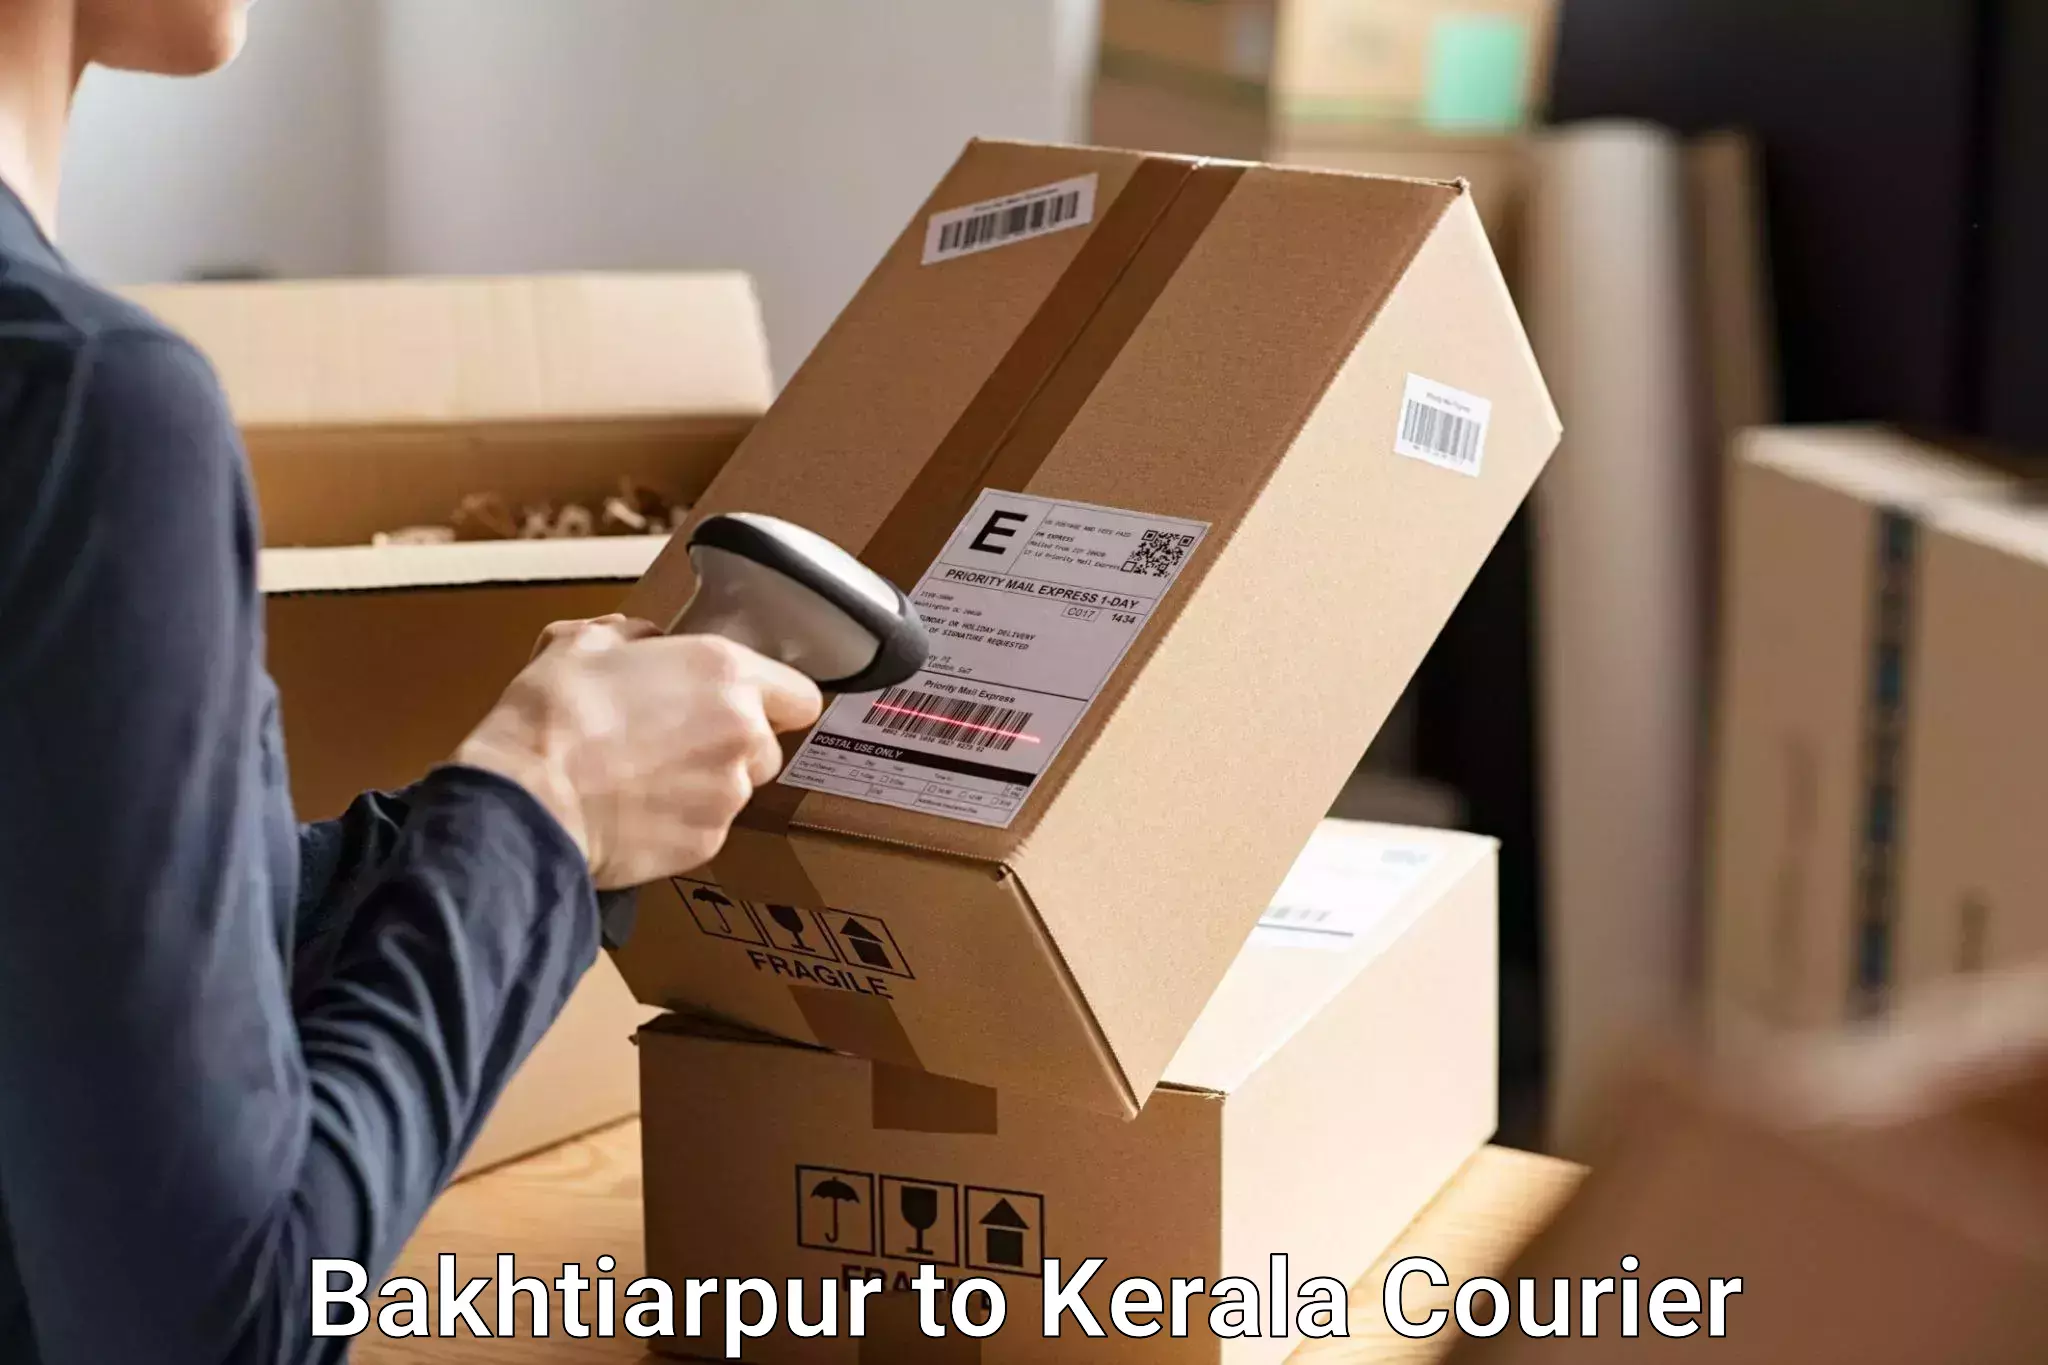 Baggage delivery management Bakhtiarpur to Rajamudy